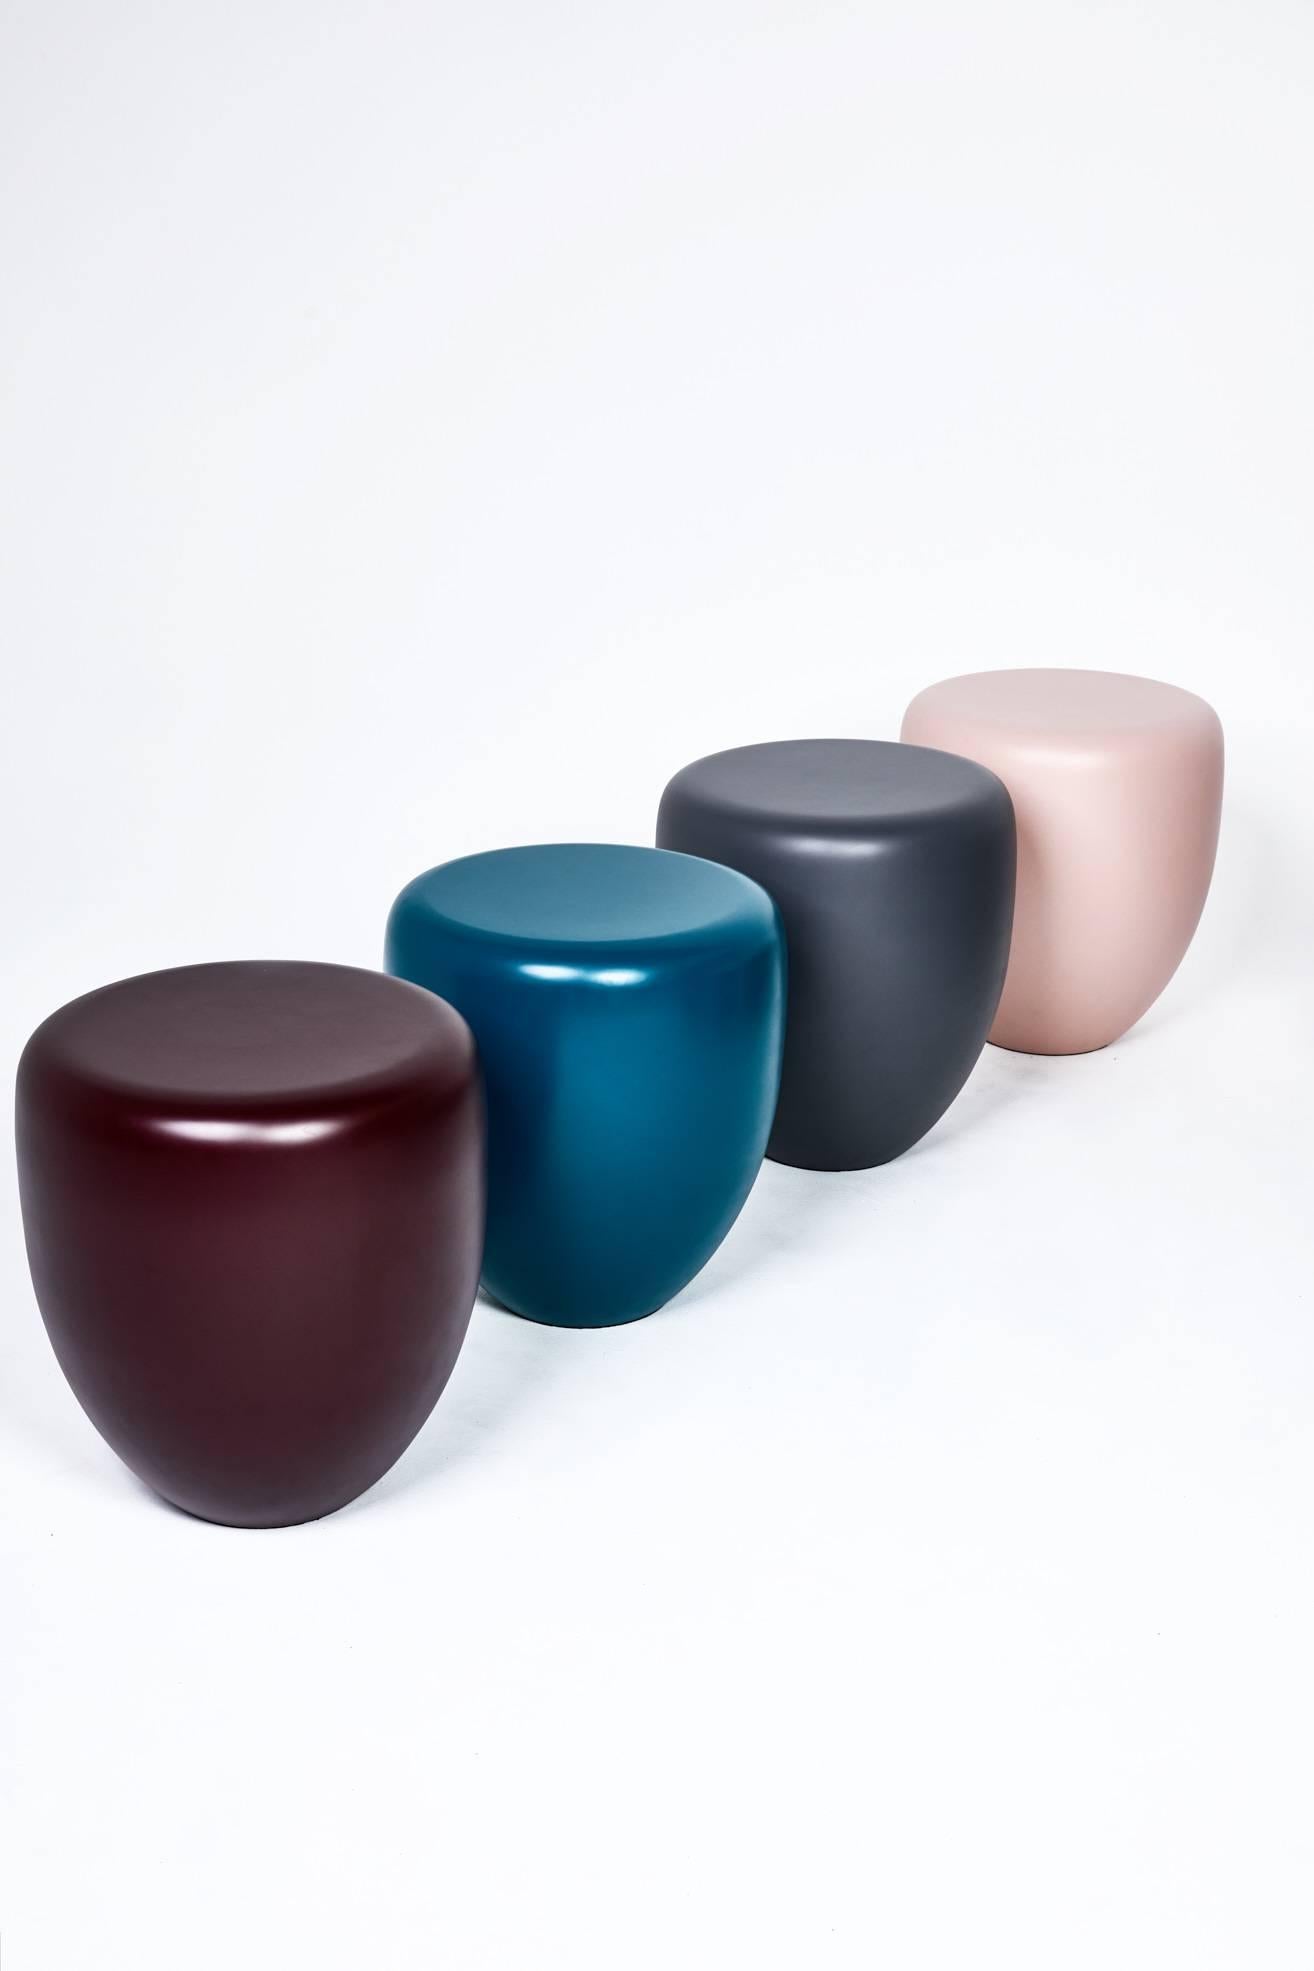 Contemporary Side Table, Powdery mate DOT by Reda Amalou, 2017 - Glossy or mate lacquer For Sale